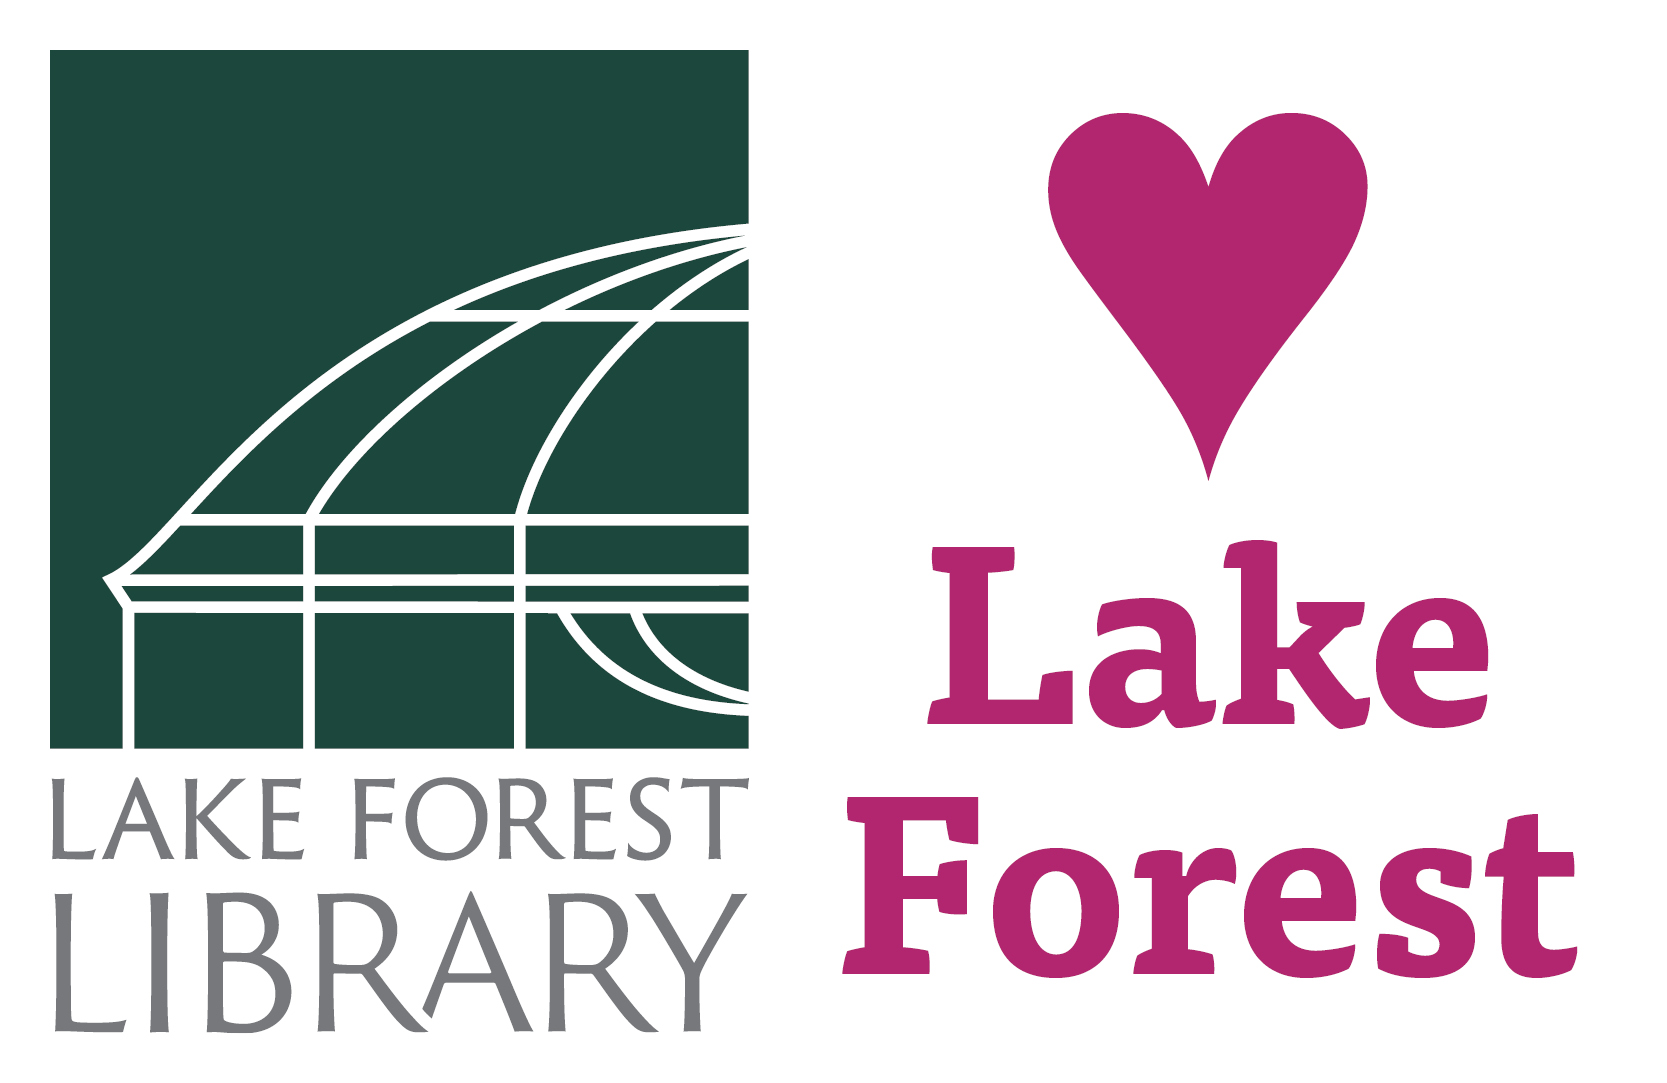 Lake Forest Library loves Lake Forest